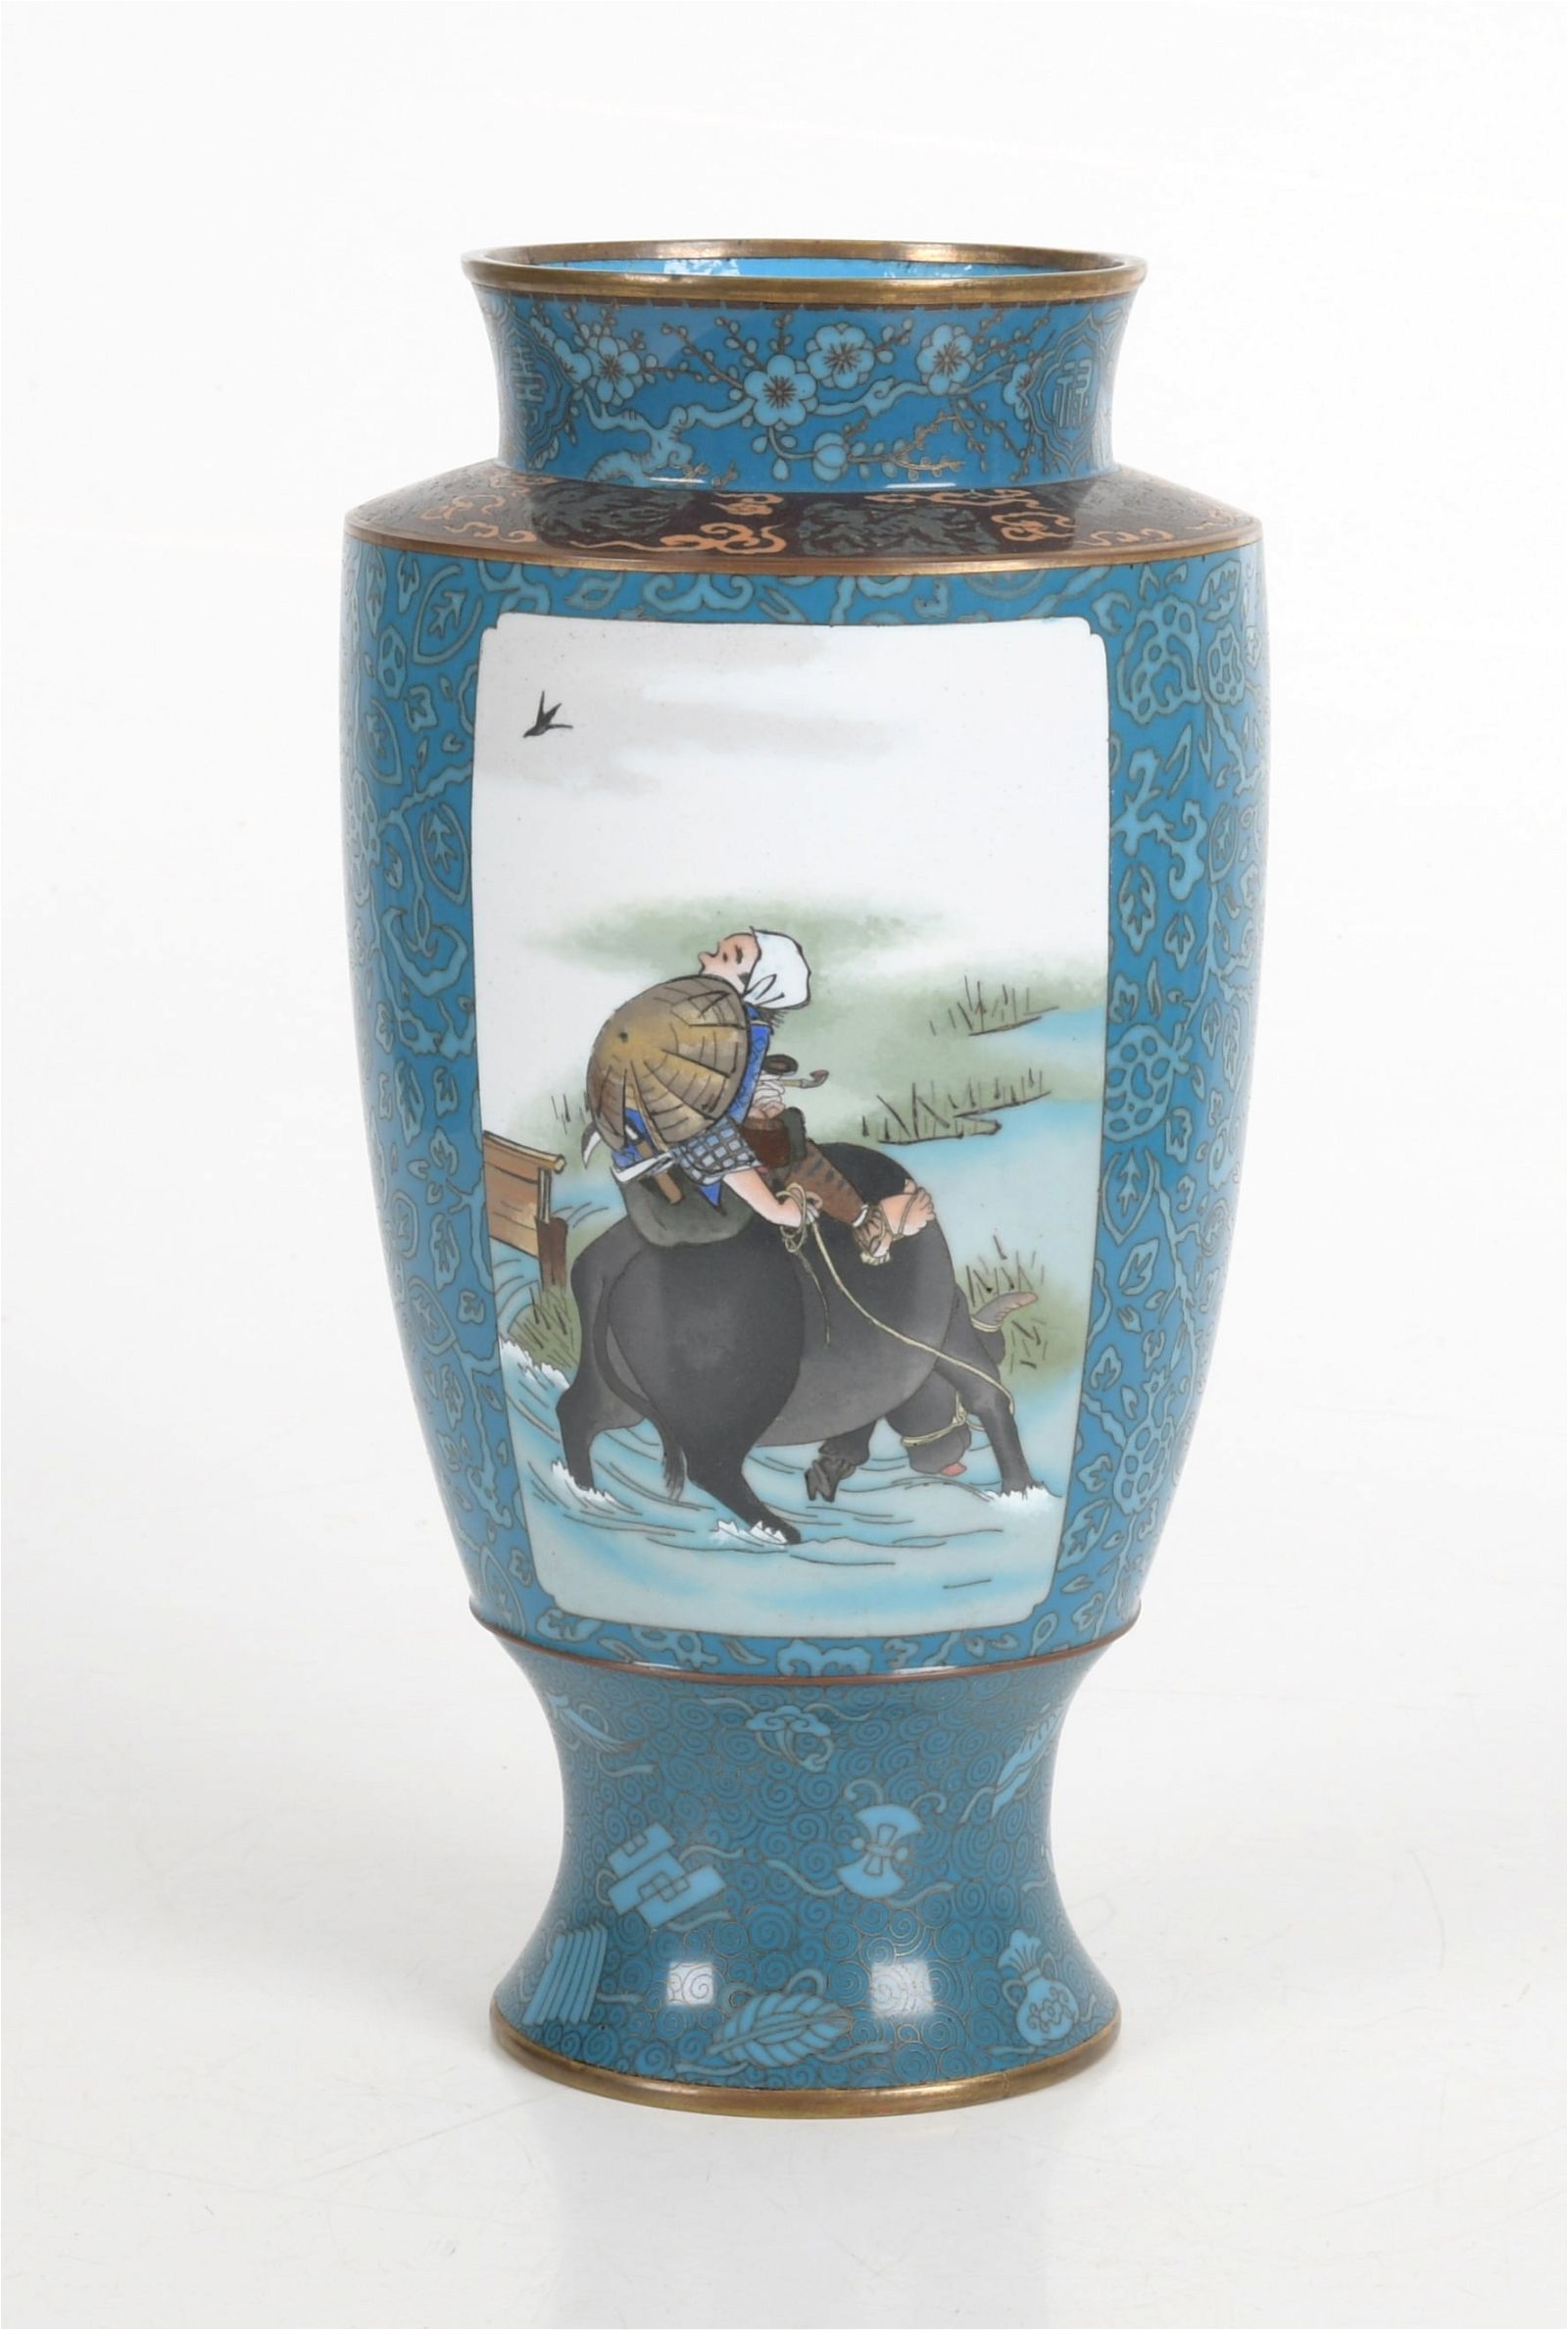 Japanese cloisonné vase with narrative decoration, which hammered for $33,000 and sold for $41,250 with buyer’s premium at Locati LLC.